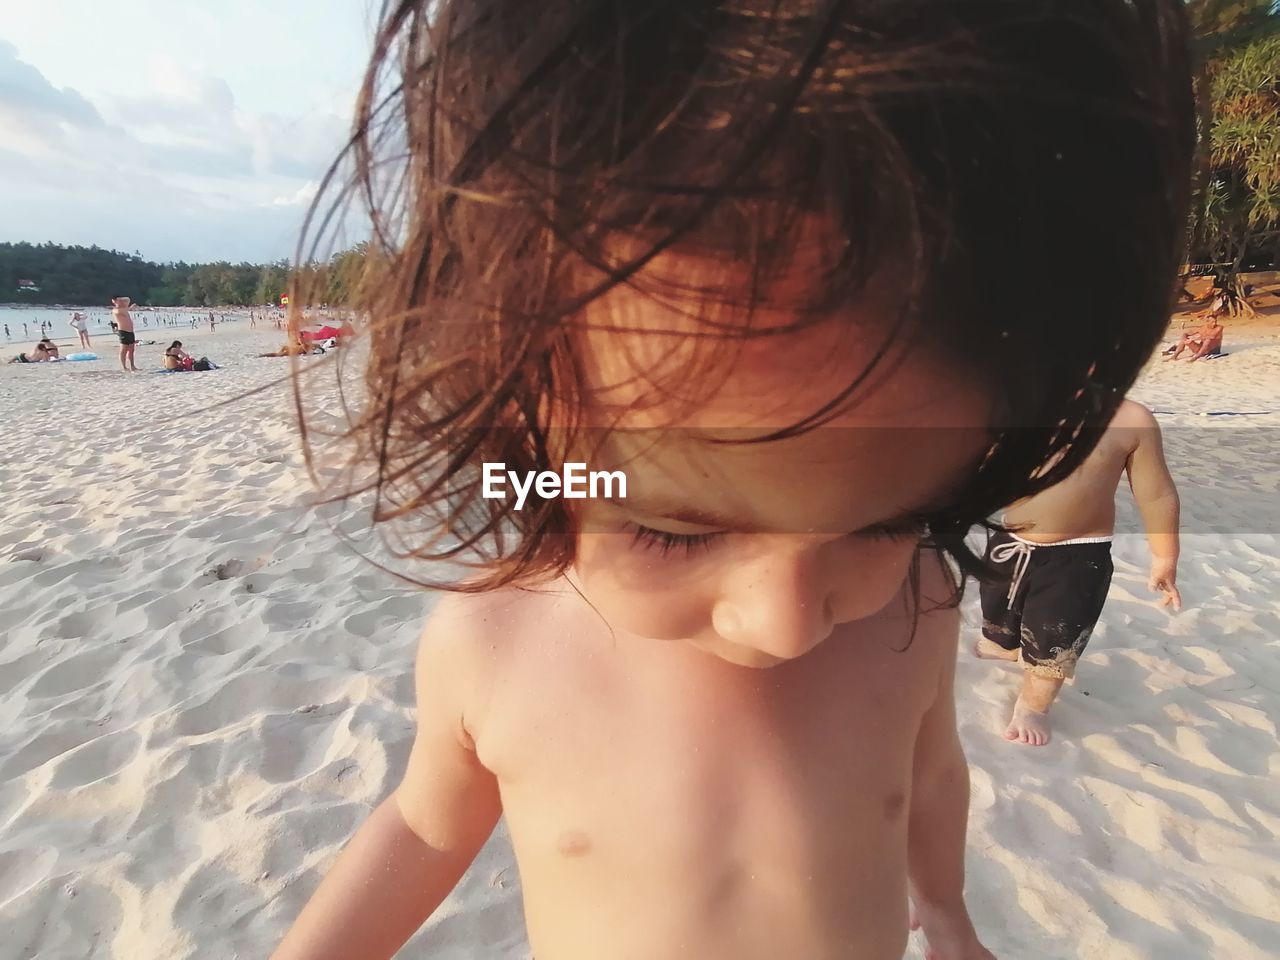 MIDSECTION OF SHIRTLESS BOY AT BEACH